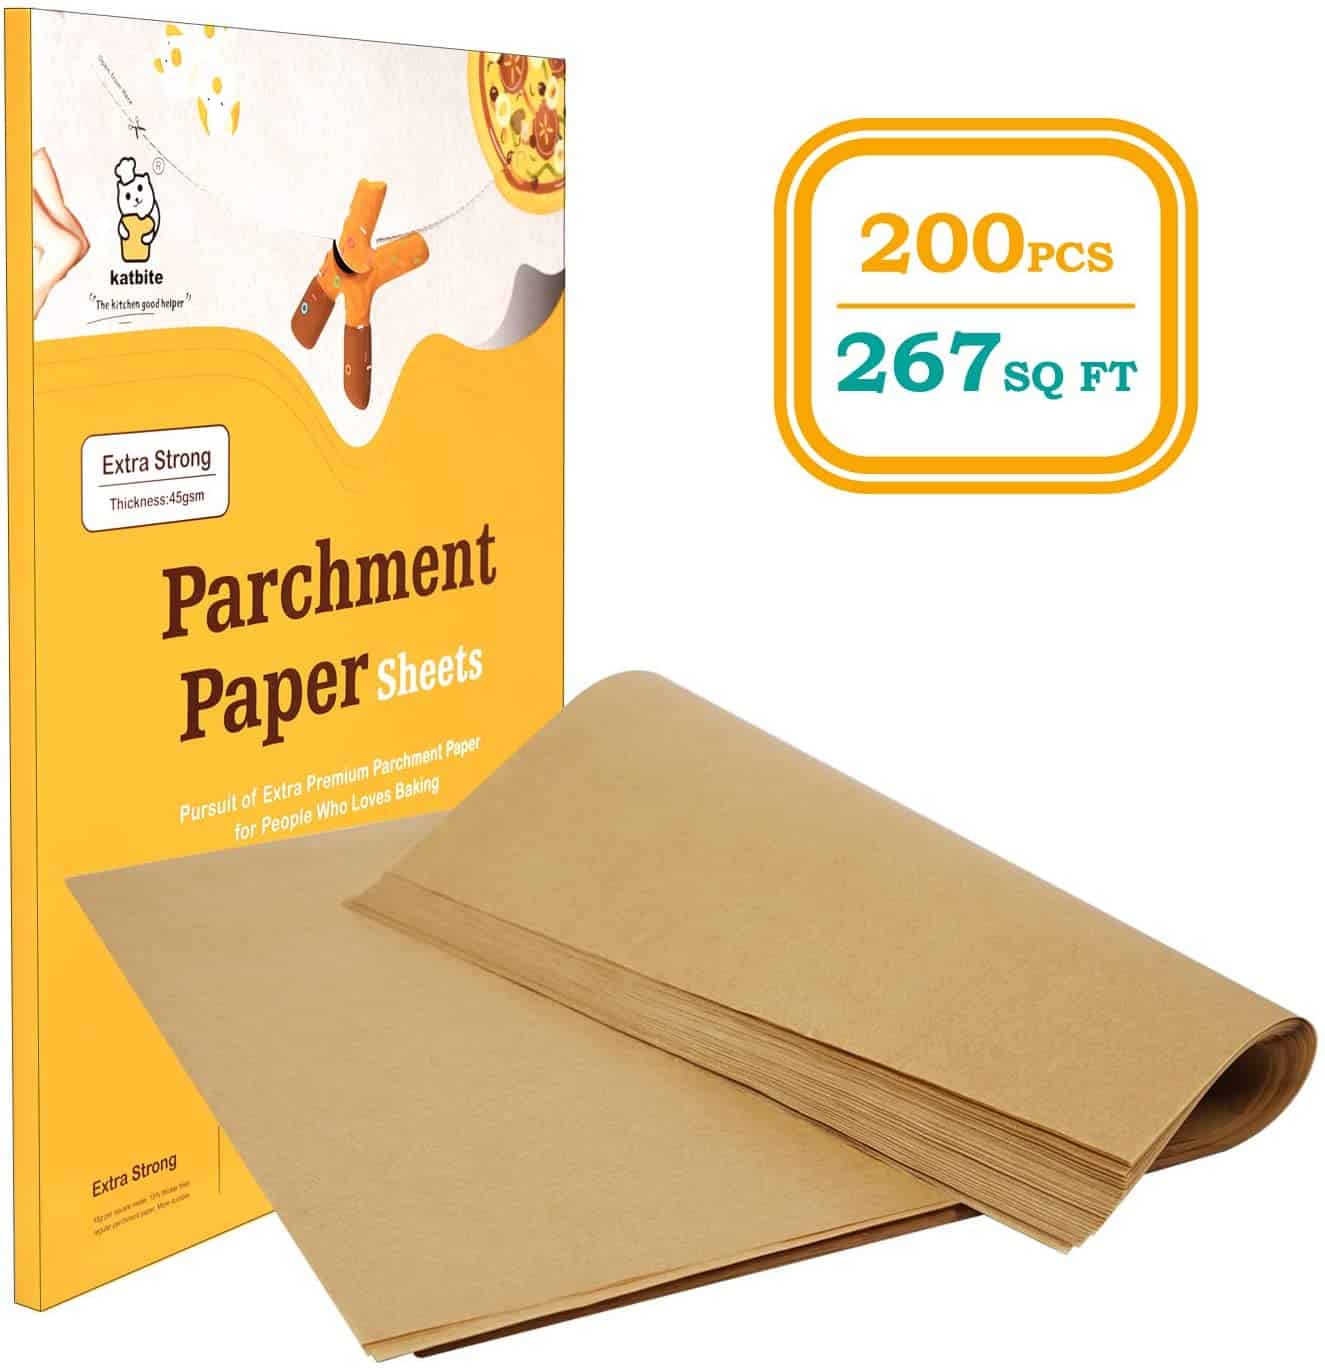 200Pcs 12x16/9x13 Inch Heavy Duty Unbleached Parchment Paper, Parchment Paper Sheets for Baking Cookies, Cooking, Frying, Air Fryer, Grilling Rack, Oven